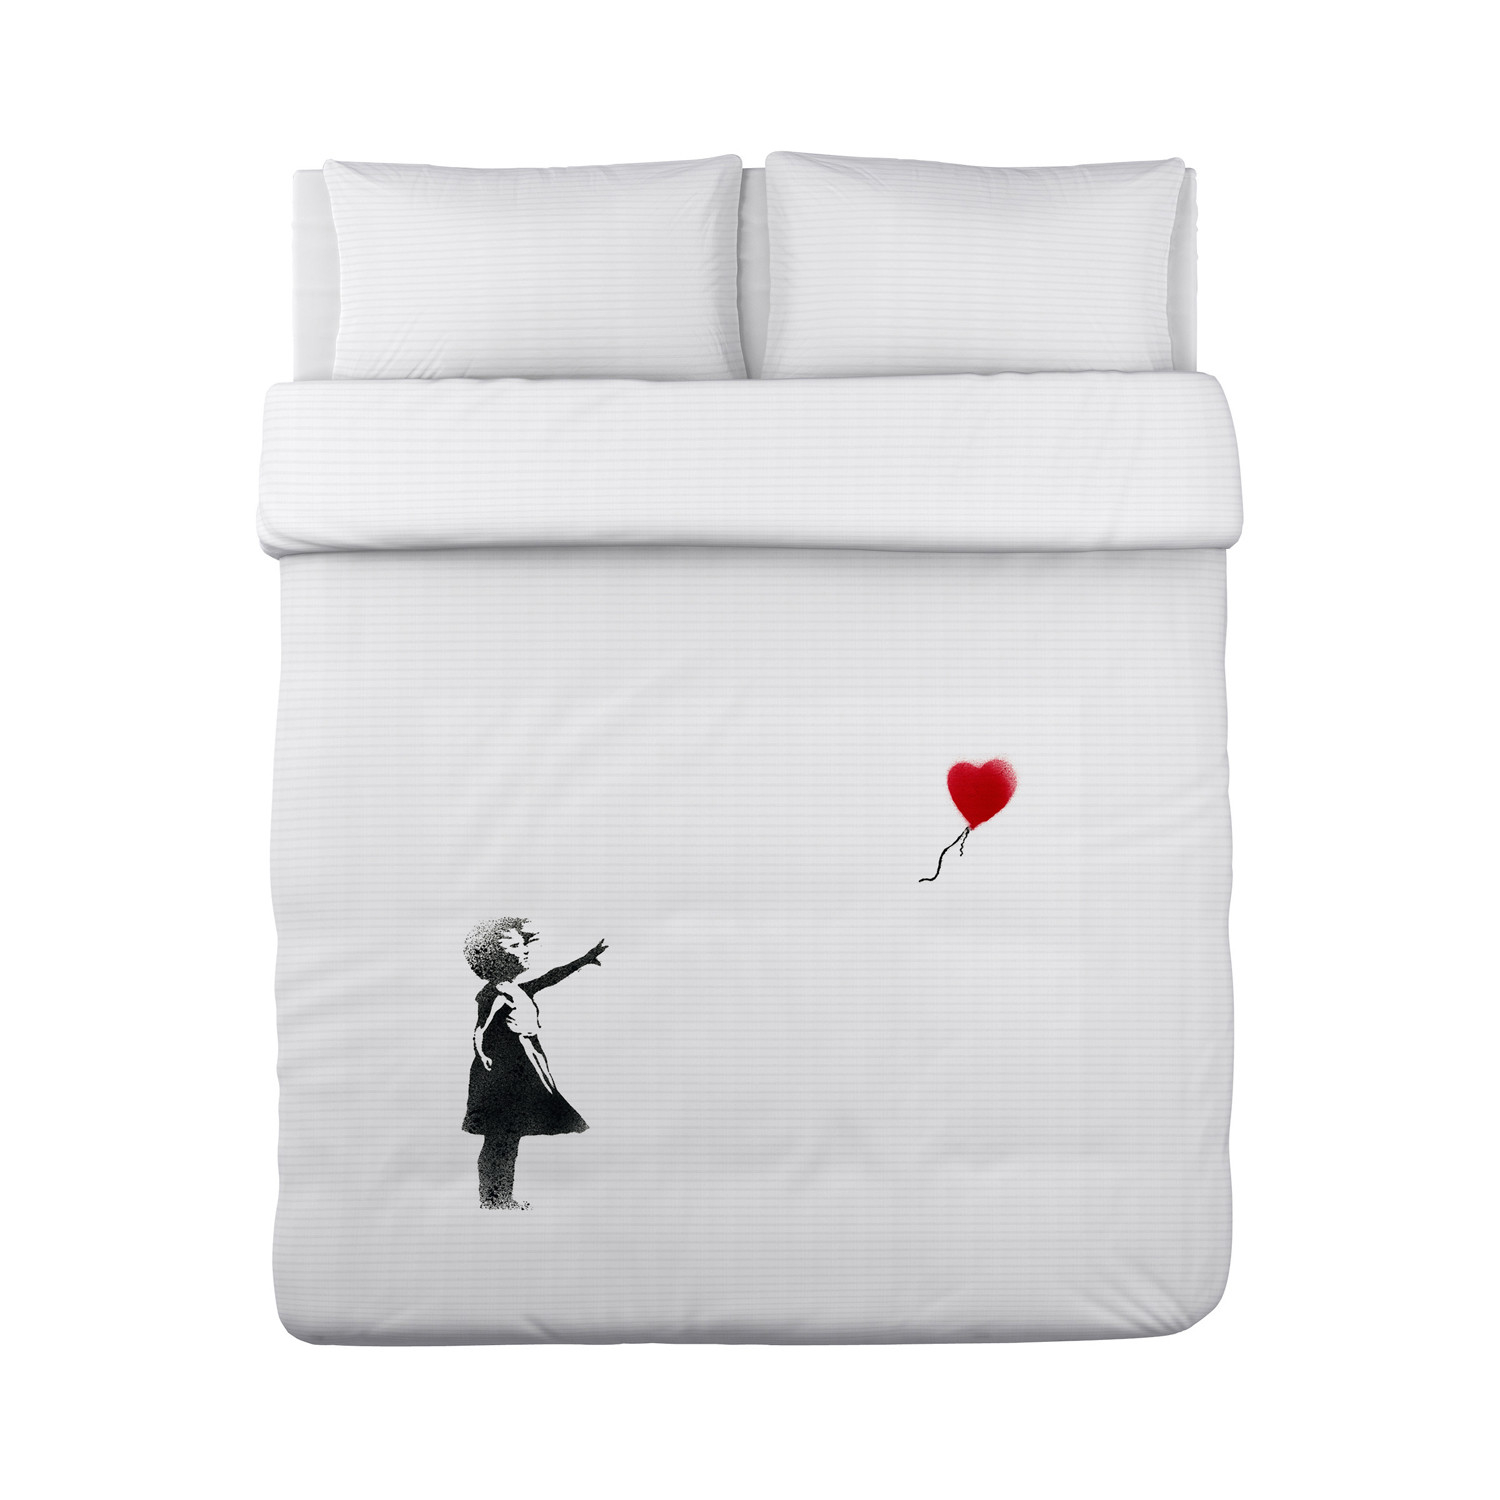 There Is Always Hope Lightweight Duvet Cover Full Queen